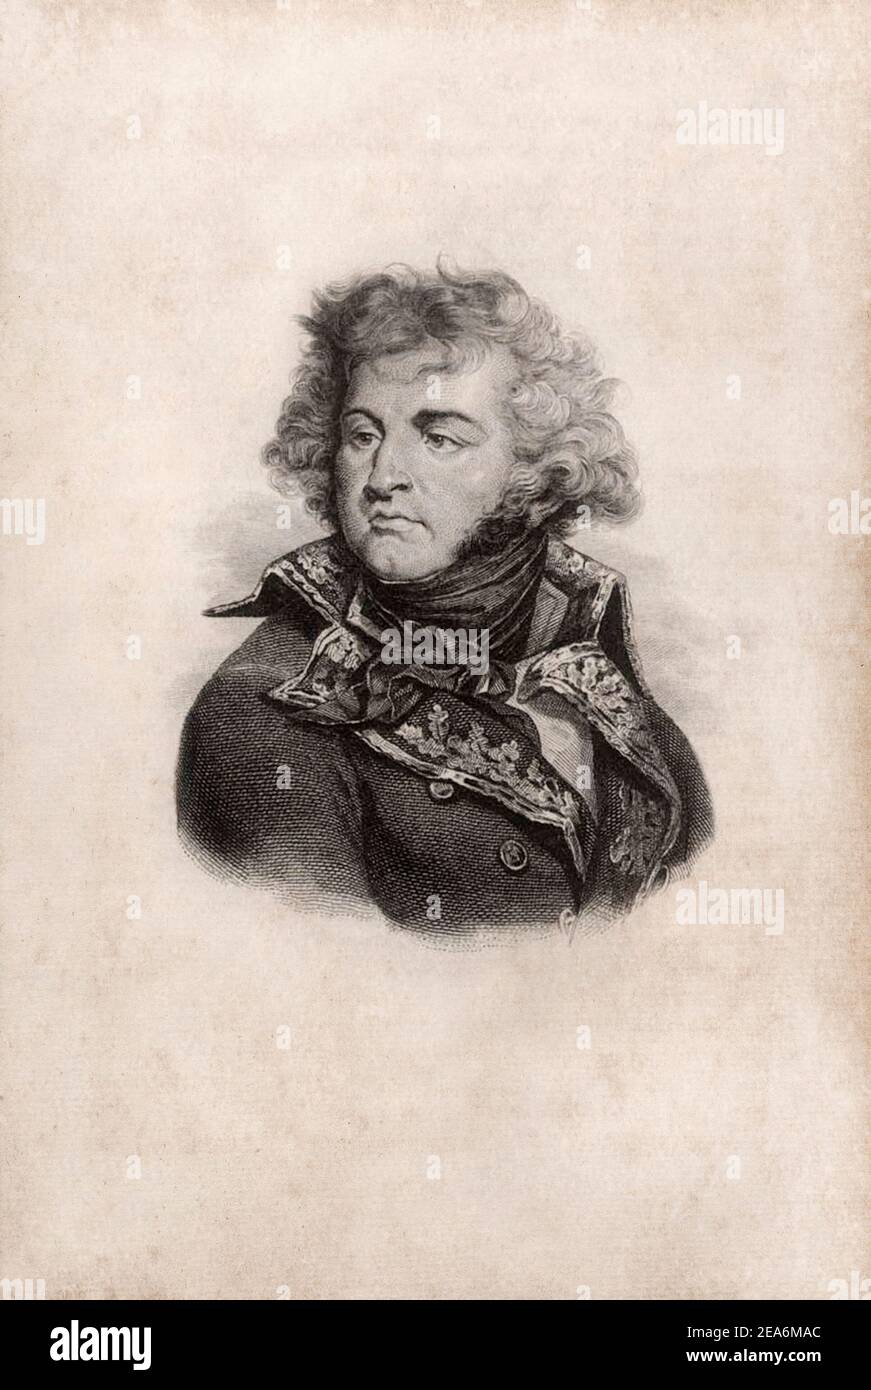 Jean-Baptiste Kleber (1753 – 1800) was a French general during the French Revolutionary Wars. His military career started in Habsburg service, but his Stock Photo